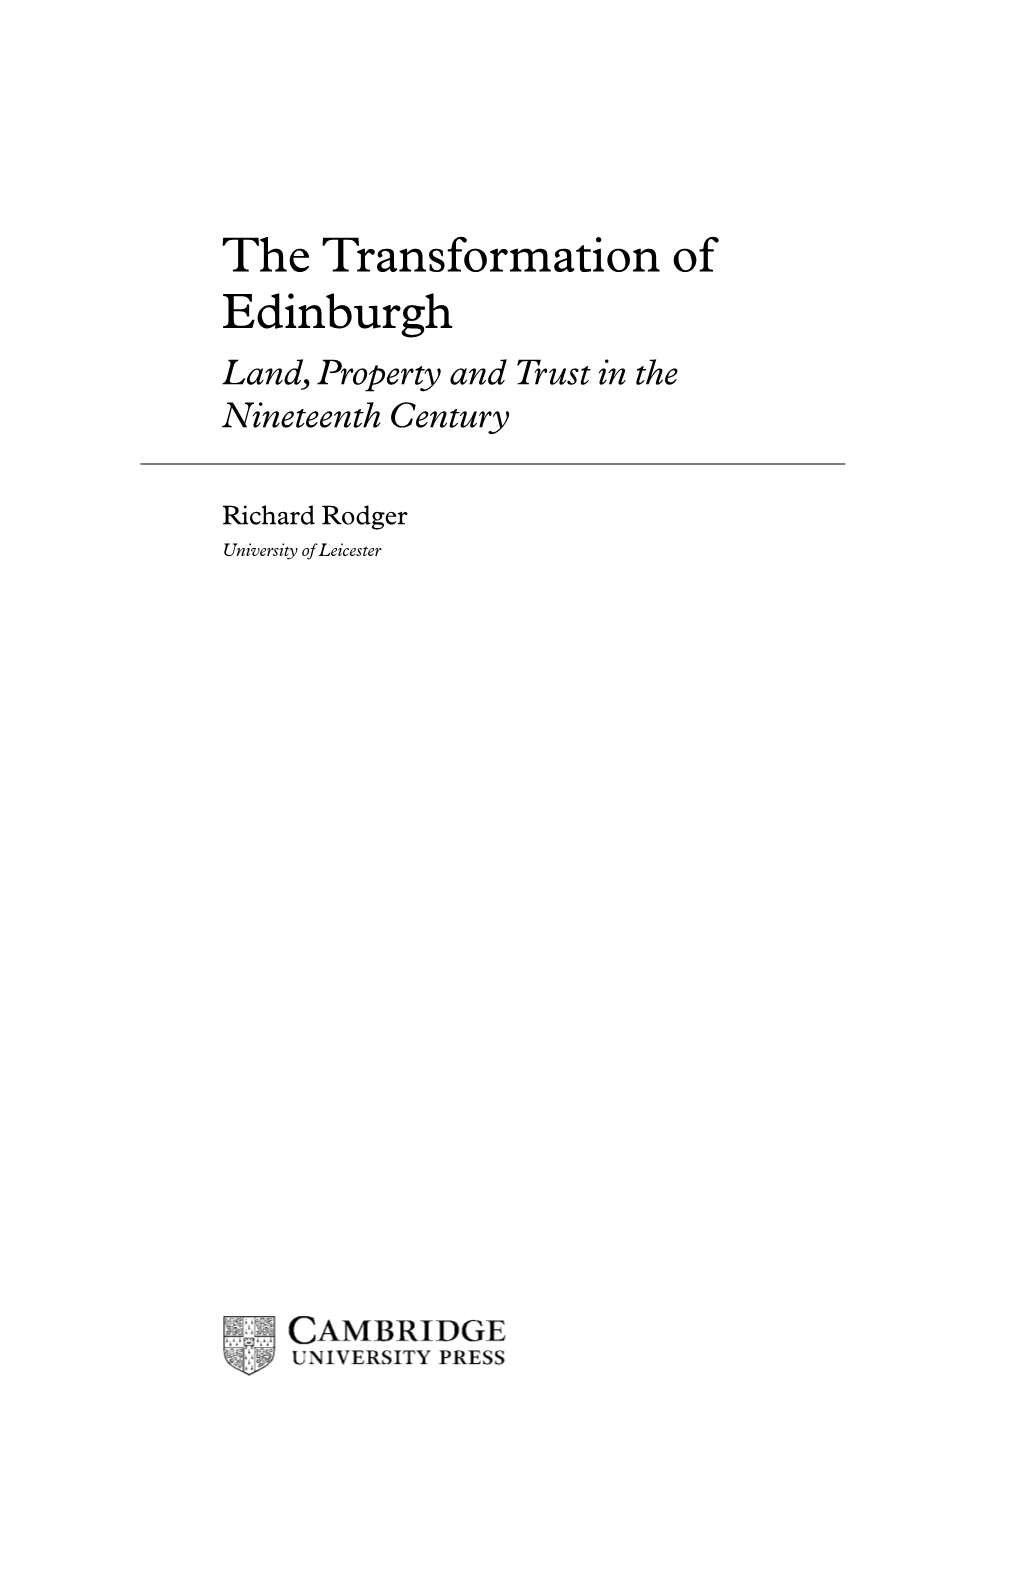 The Transformation of Edinburgh Land,Property and Trust in the Nineteenth Century